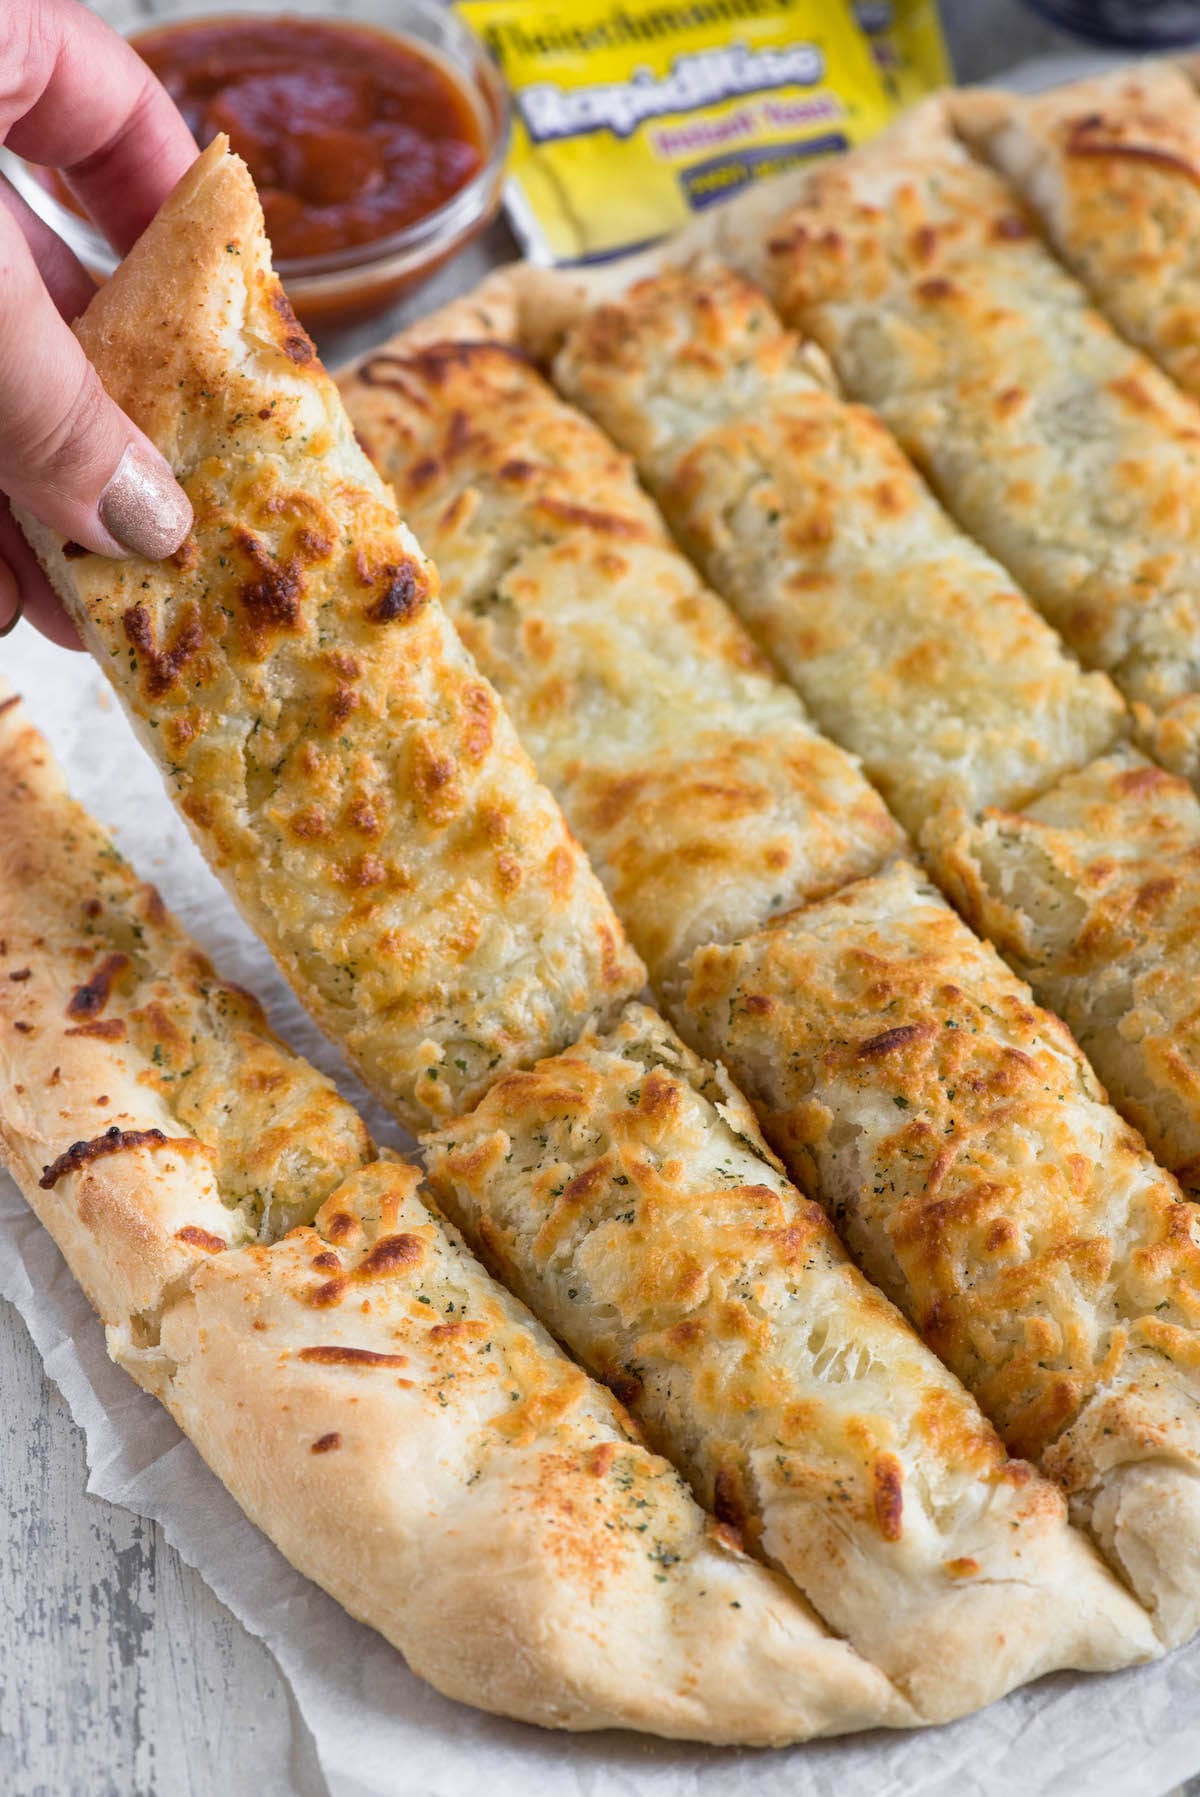 cut breadsticks on parchment with yeast and sauce behind